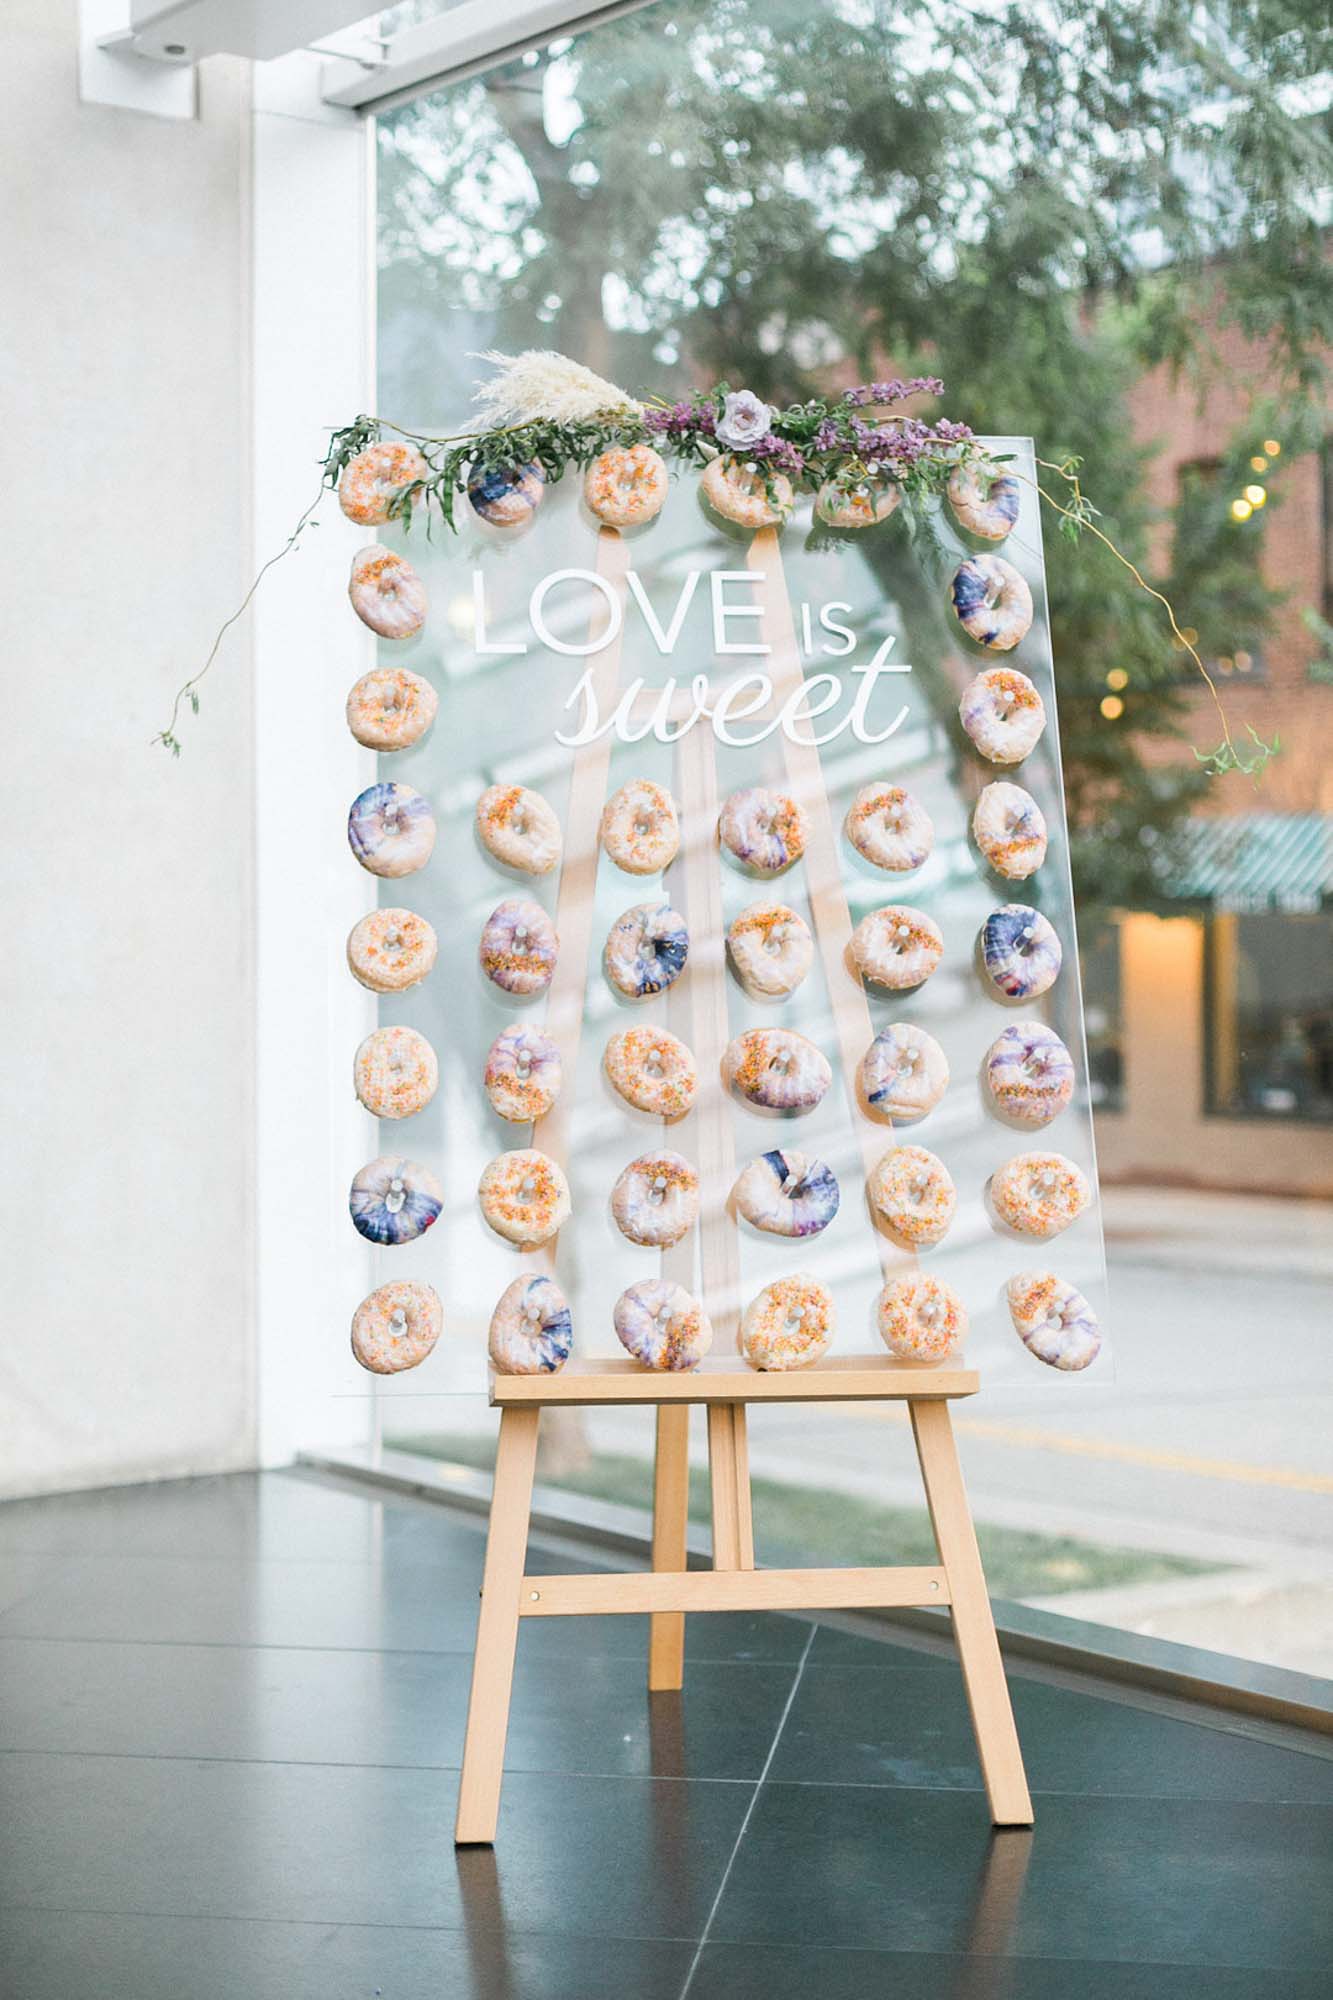 Elegant and eclectic wedding inspiration with gorgeous pops of purple | Laurelyn Savannah Photography | Featured on Equally Wed, the leading LGBTQ+ wedding magazine